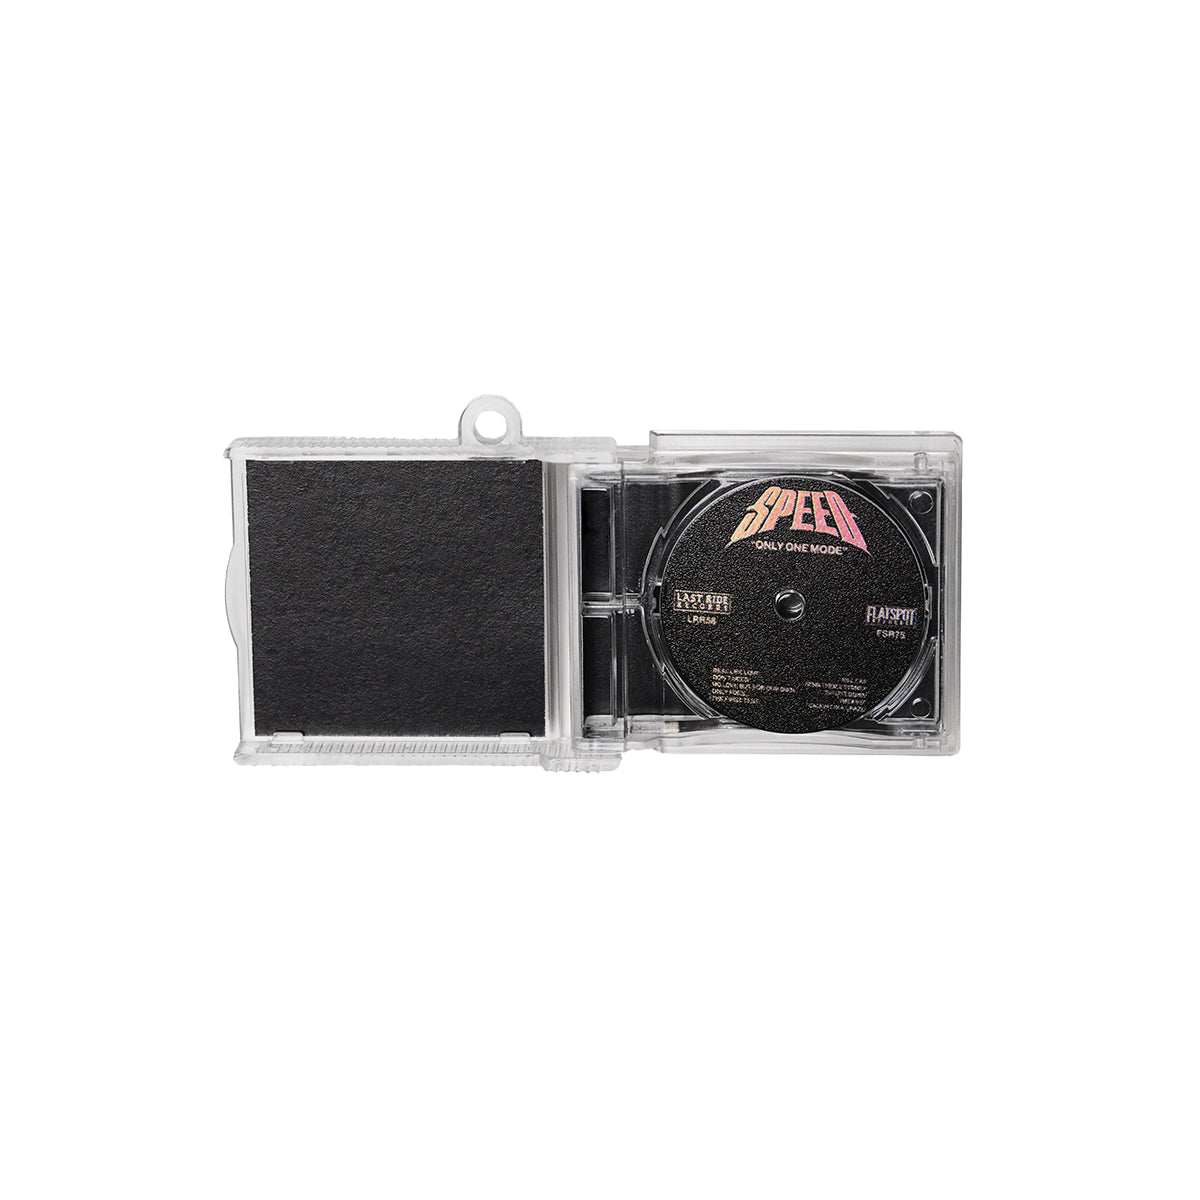 SPEED "Only One Mode" Mini CD Keychain